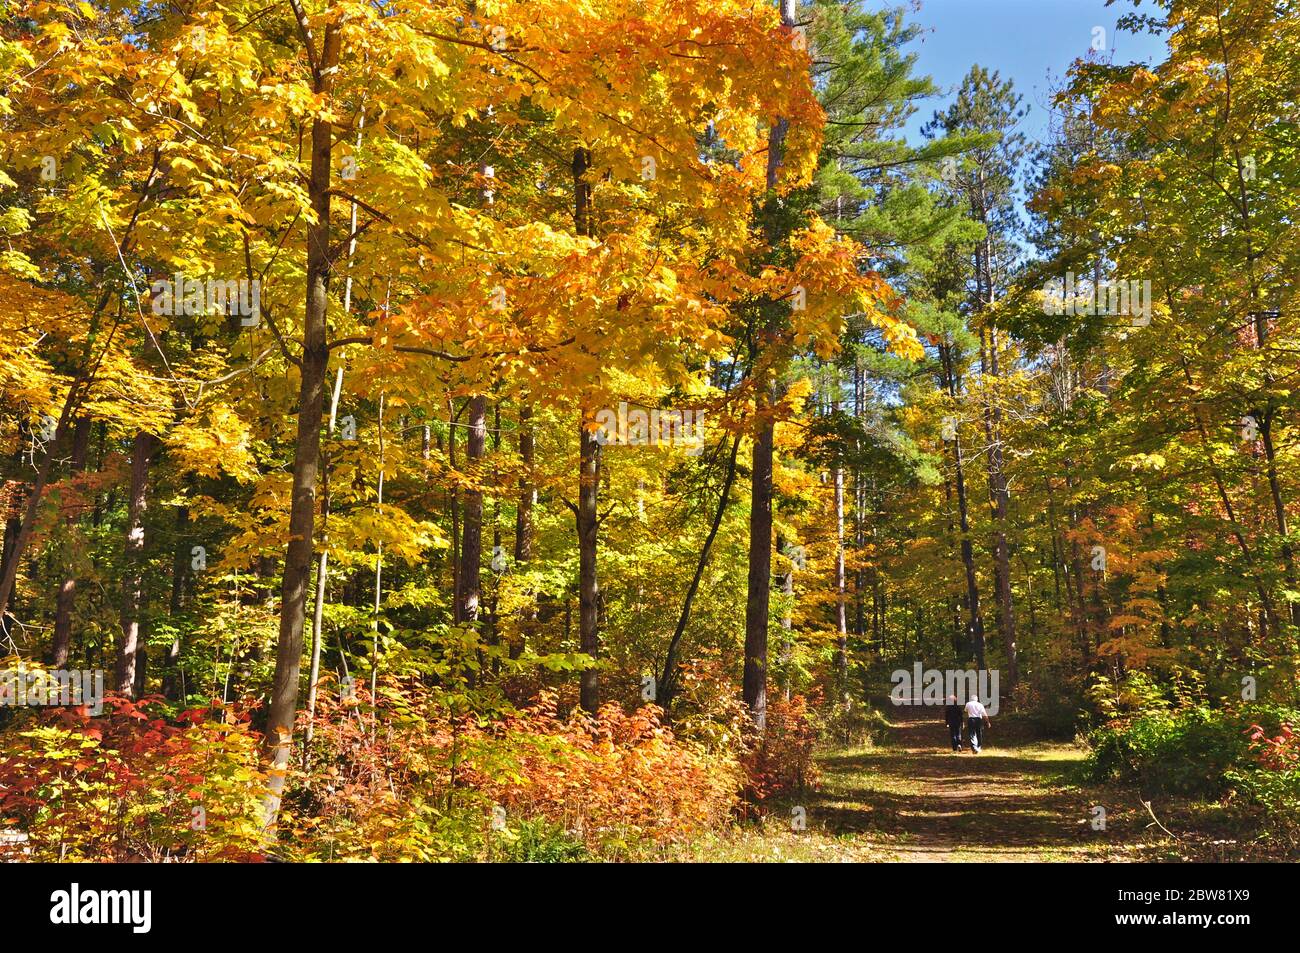 Leisure activity - walking in the forest in autumn Stock Photo